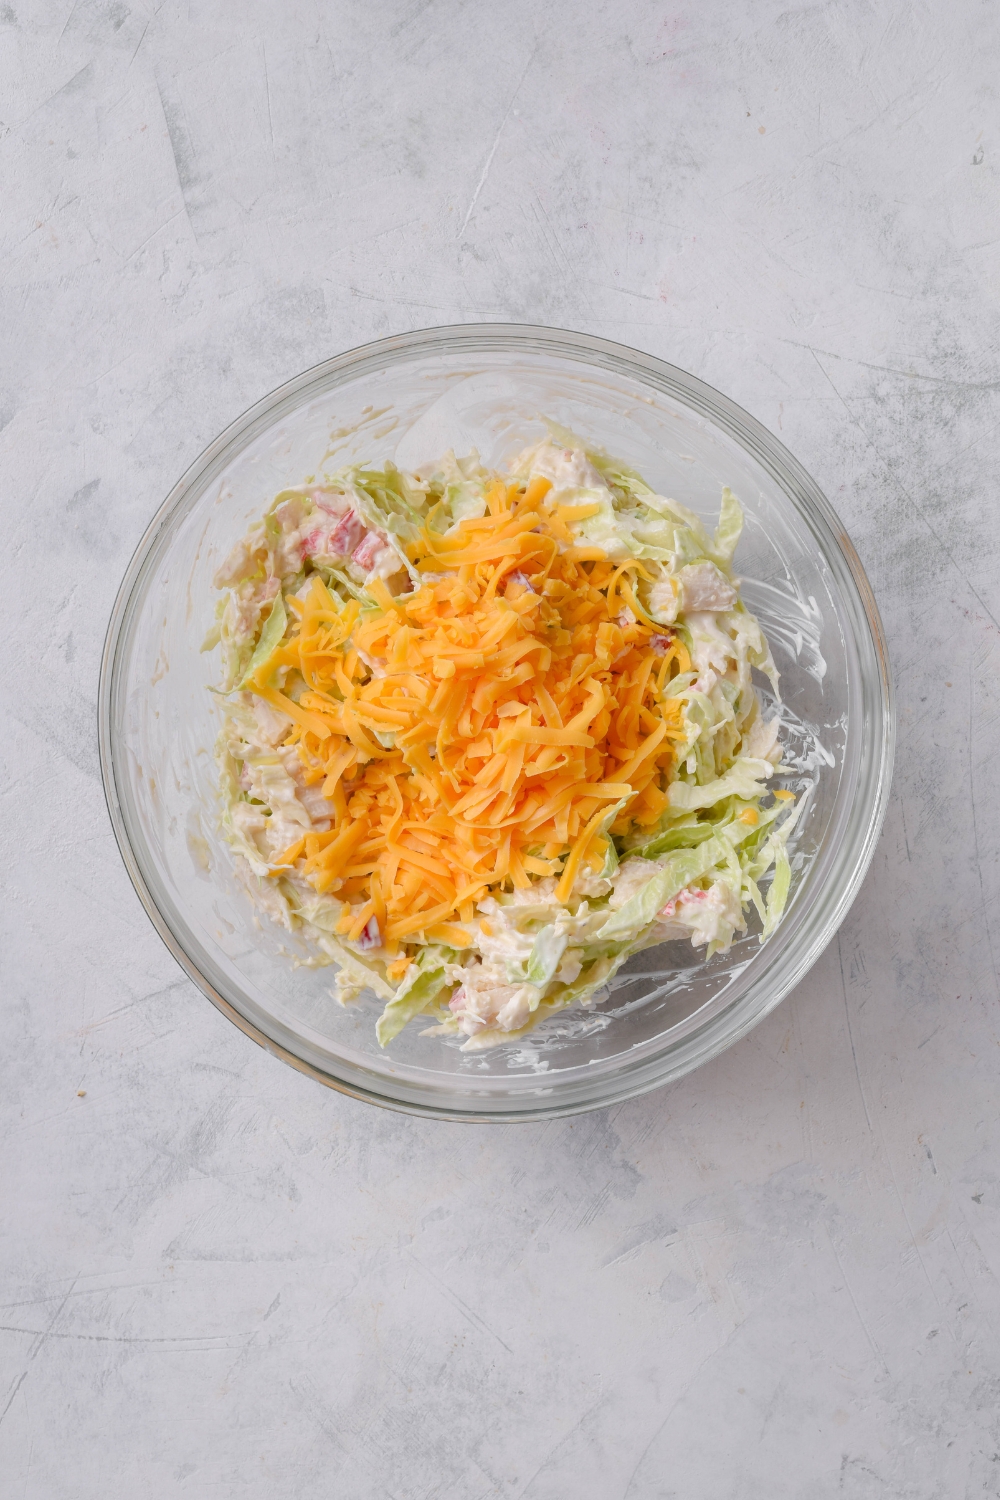 A clear bowl filled with creamy crab meat, sliced cabbage, and a pile of shredded cheese on top.